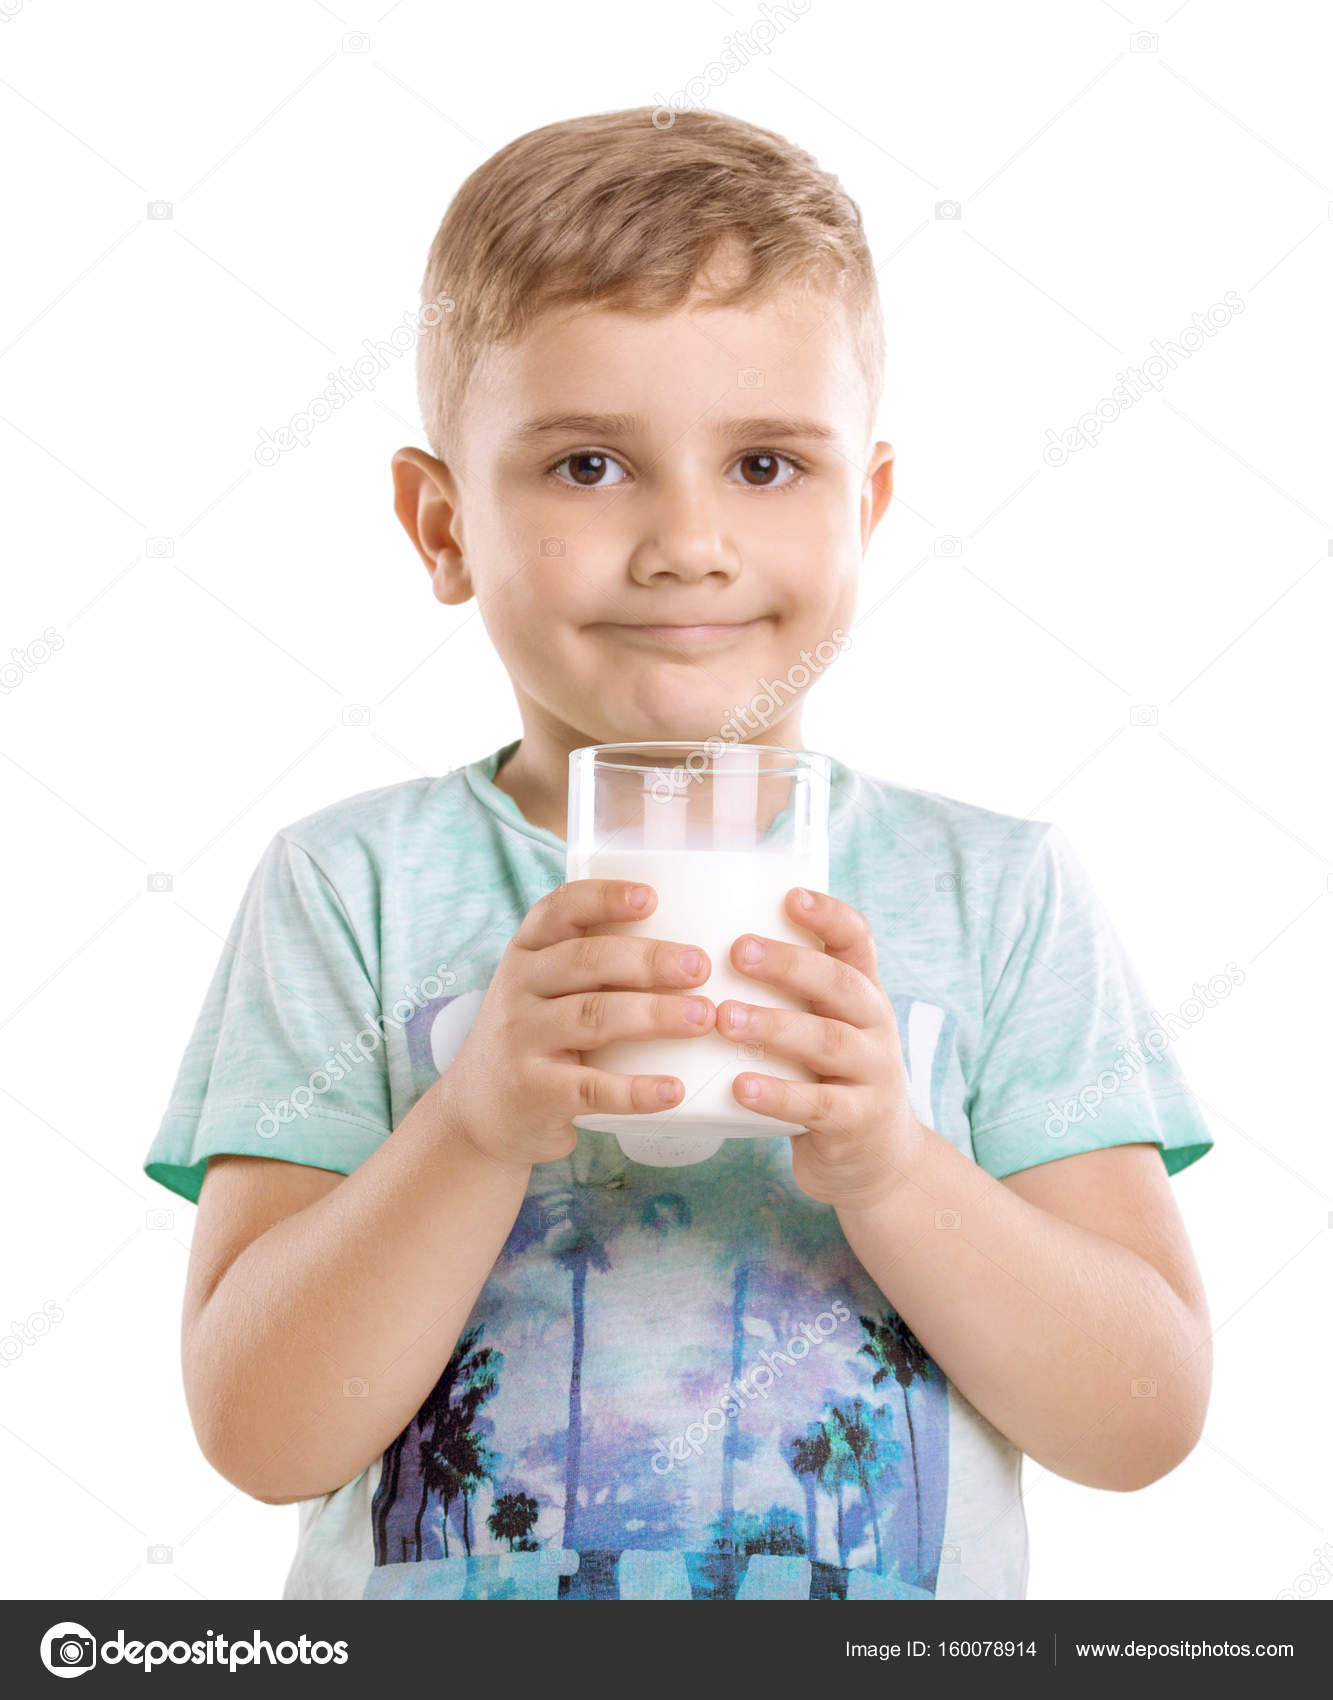 A handsome little boy holding a glass of milk in his hands isolated ...